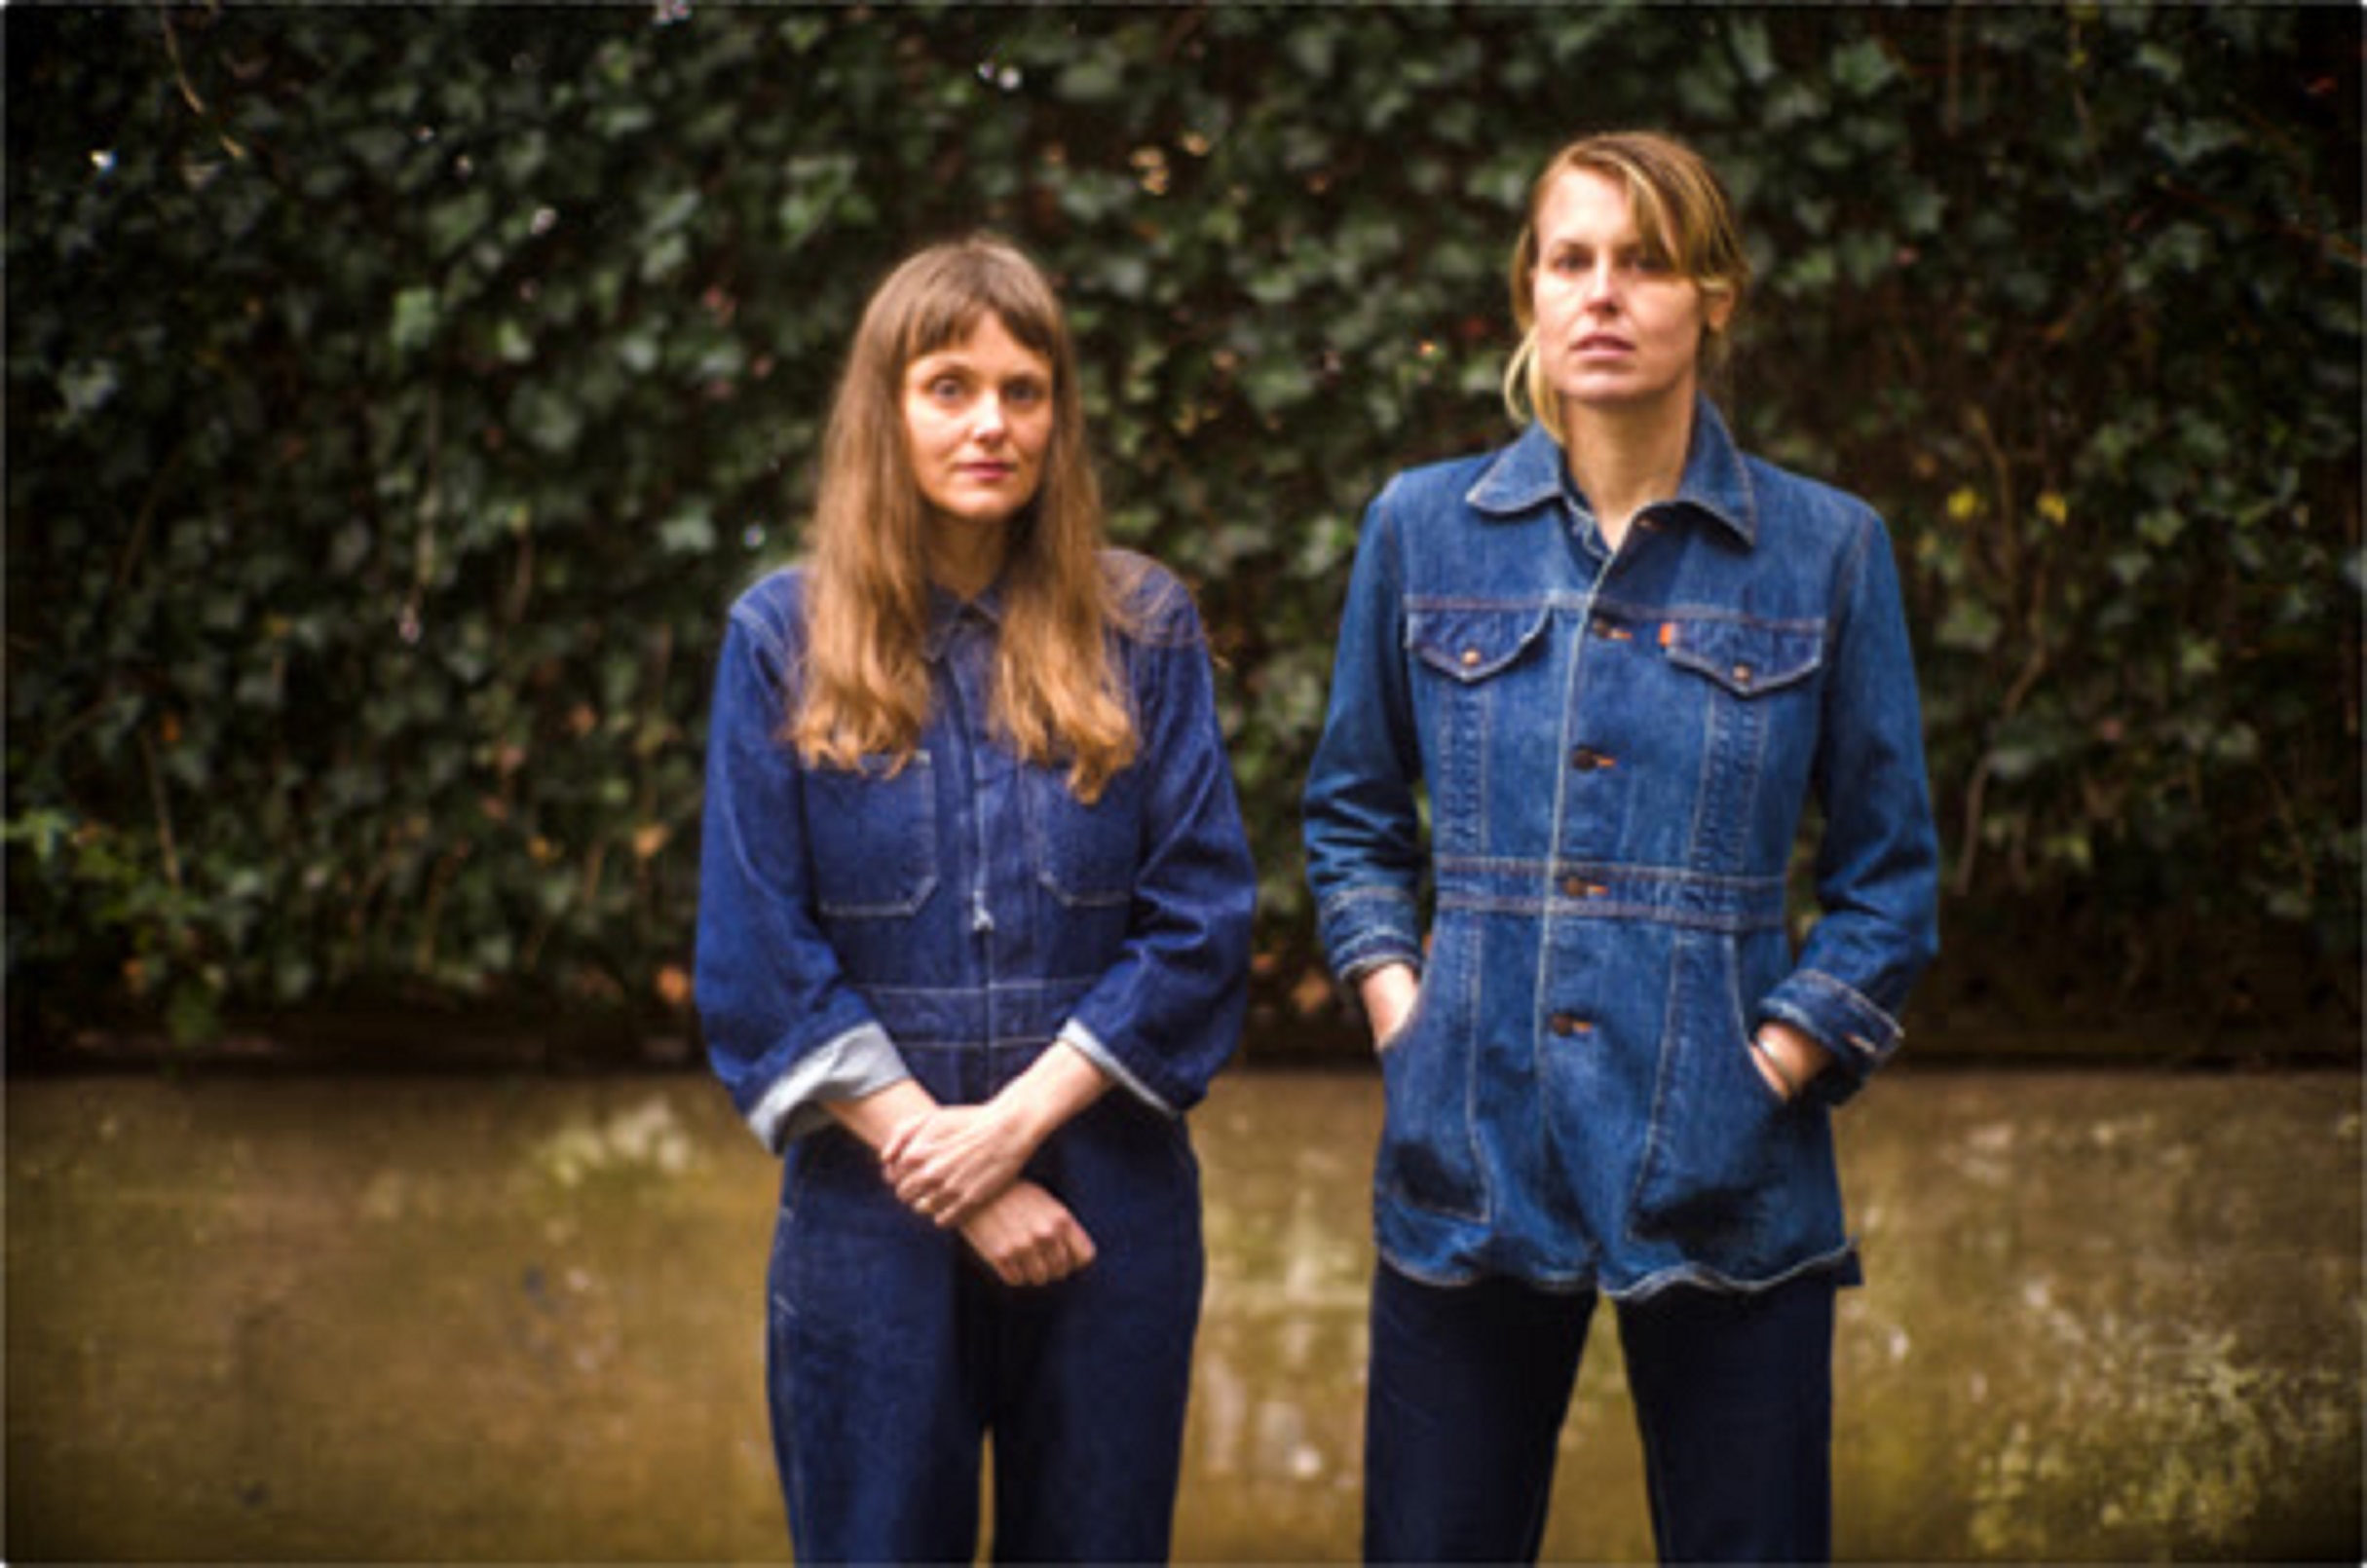 The Chapin Sisters carry forward famed family’s folk music legacy with “Bergen Street”